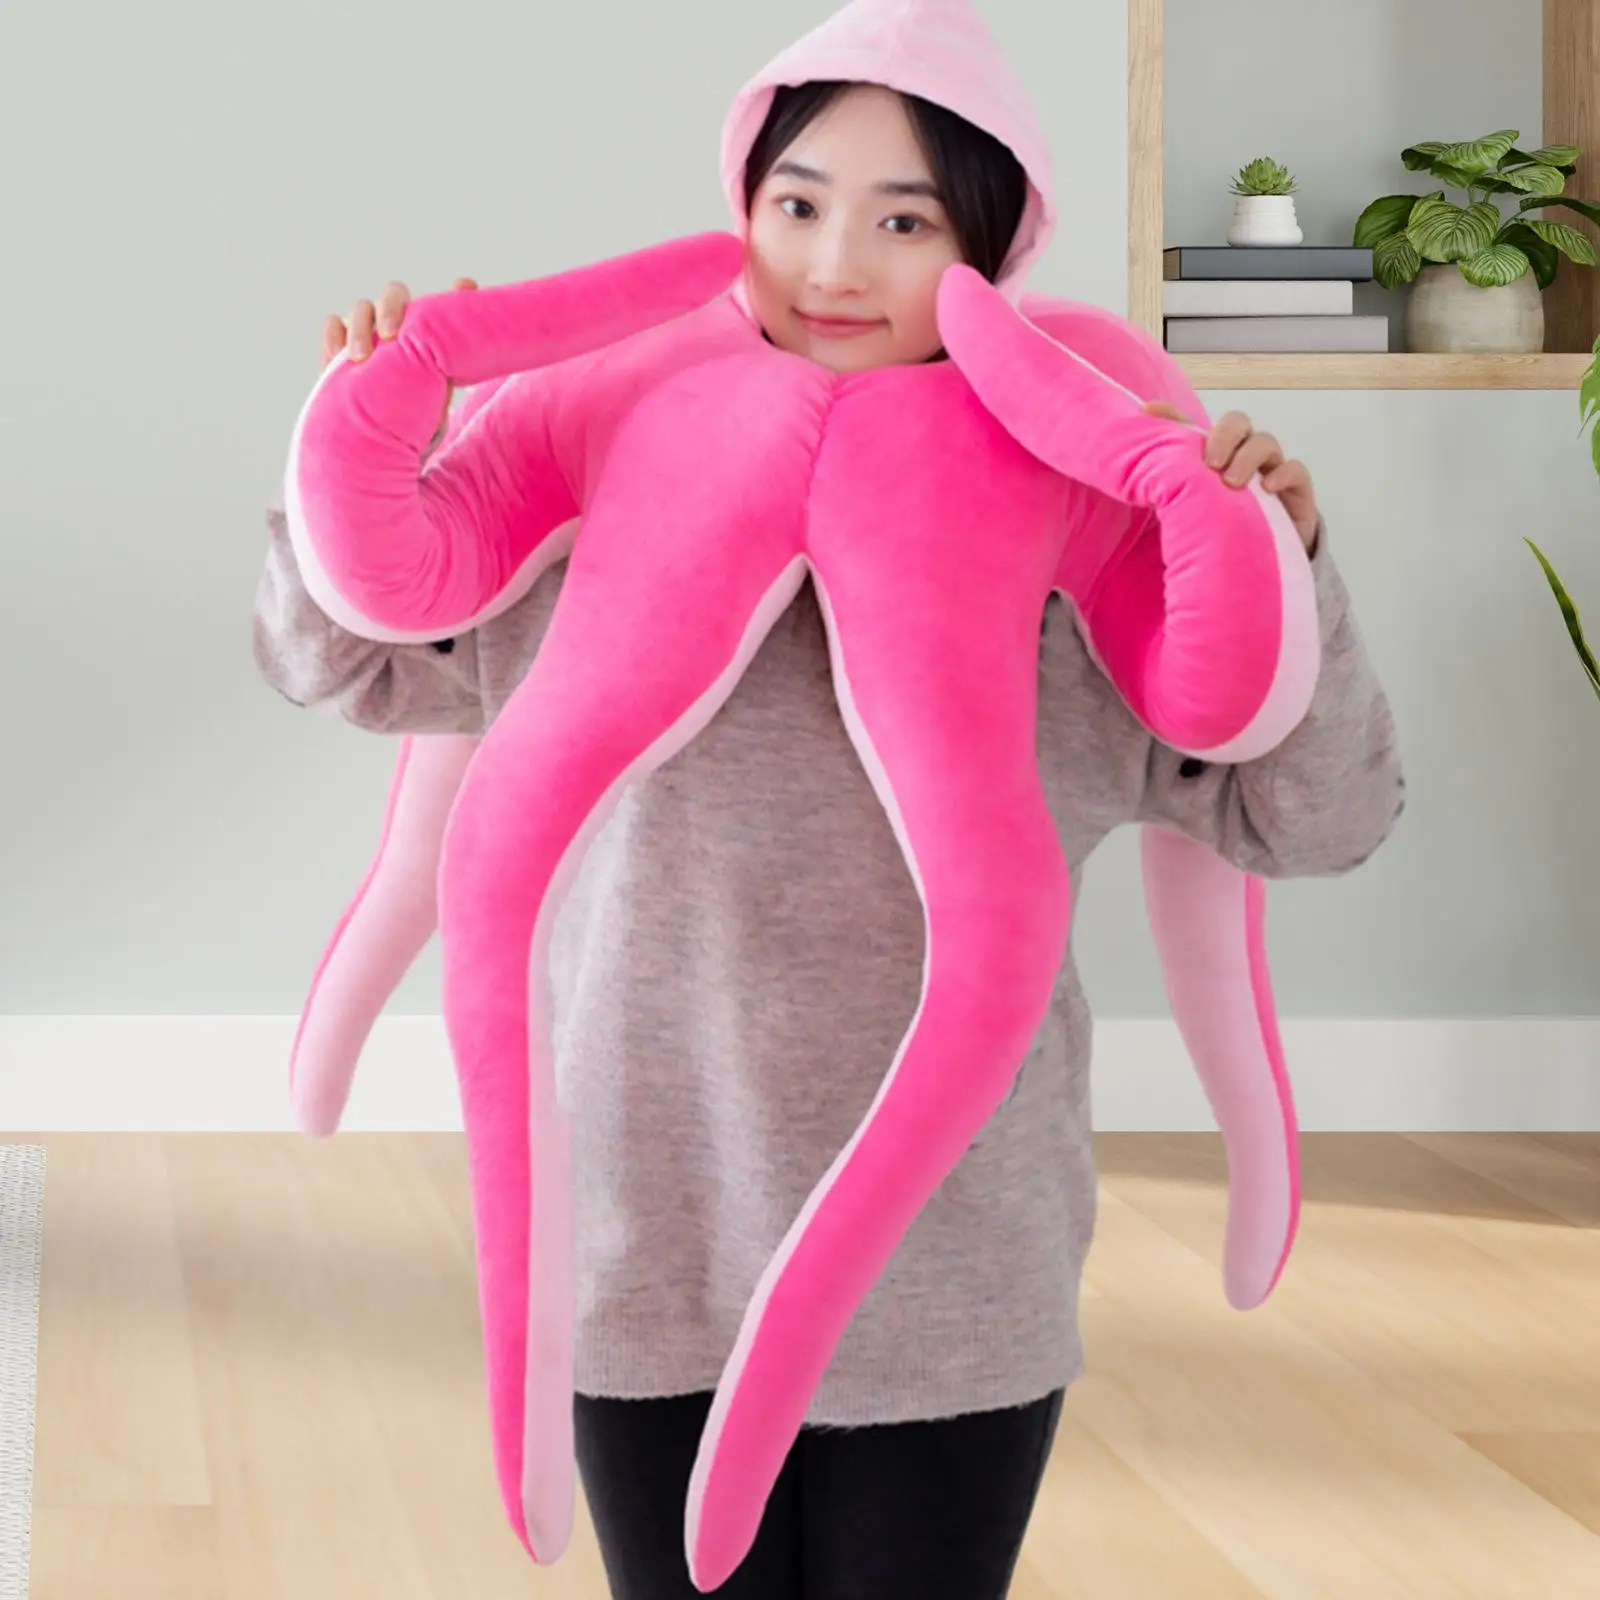 Baby Octopus Costume Wearable Fancy Dress Adorable Plush Toy Hooded Large Octopus for Adults Infants Halloween Family Newborn